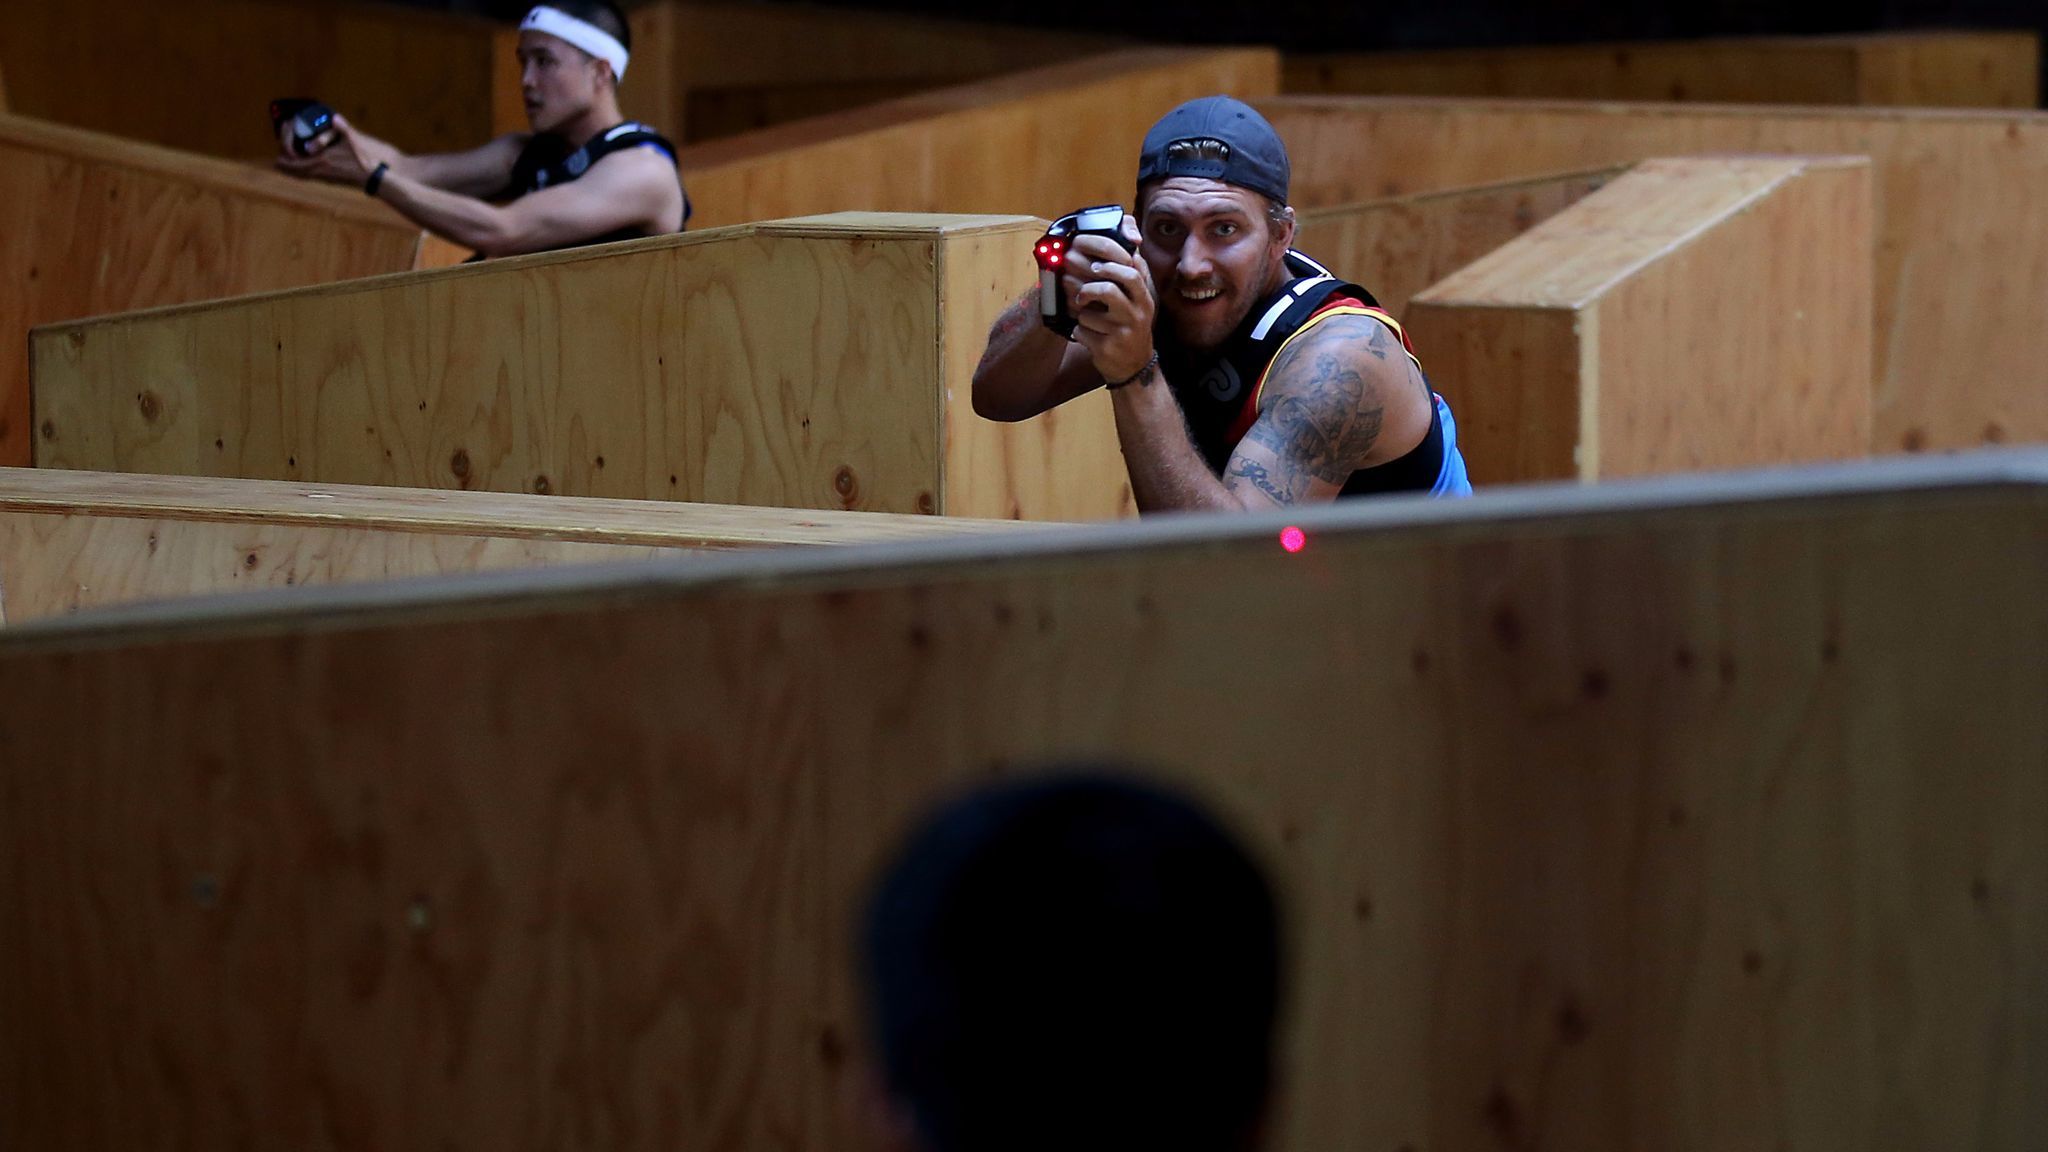 A round of laser tag at the LazRfit gym in downtown Los Angeles.